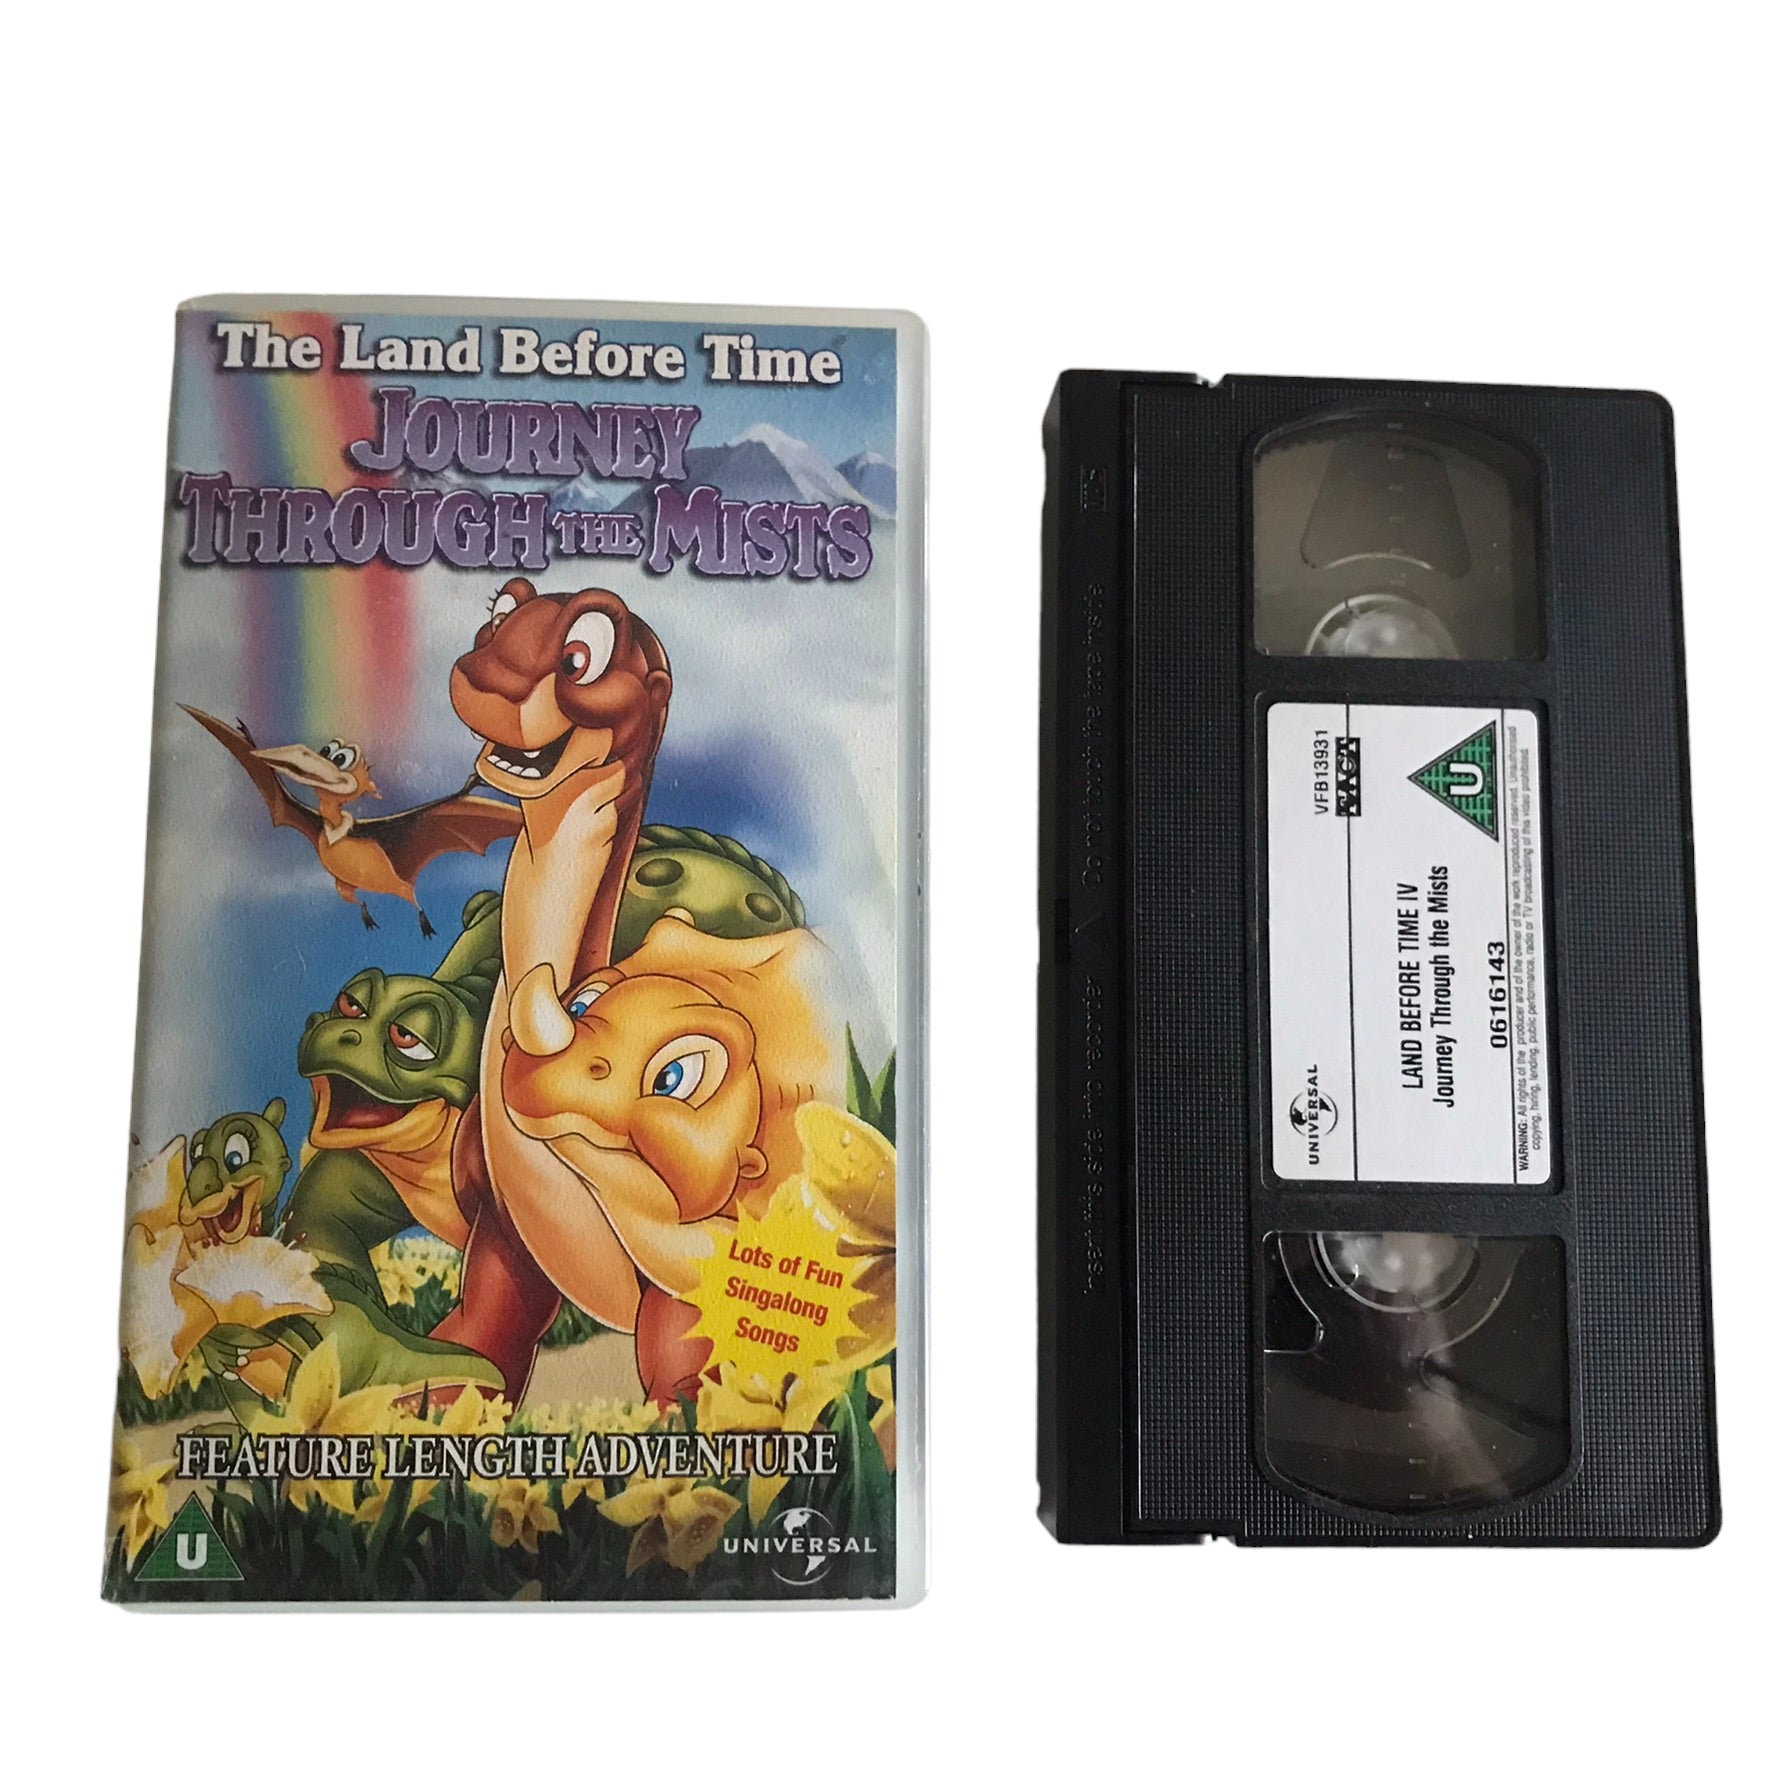 Land Before Time - Journey Through The Mists - Universal - 616143 - Kids - Pal - VHS-